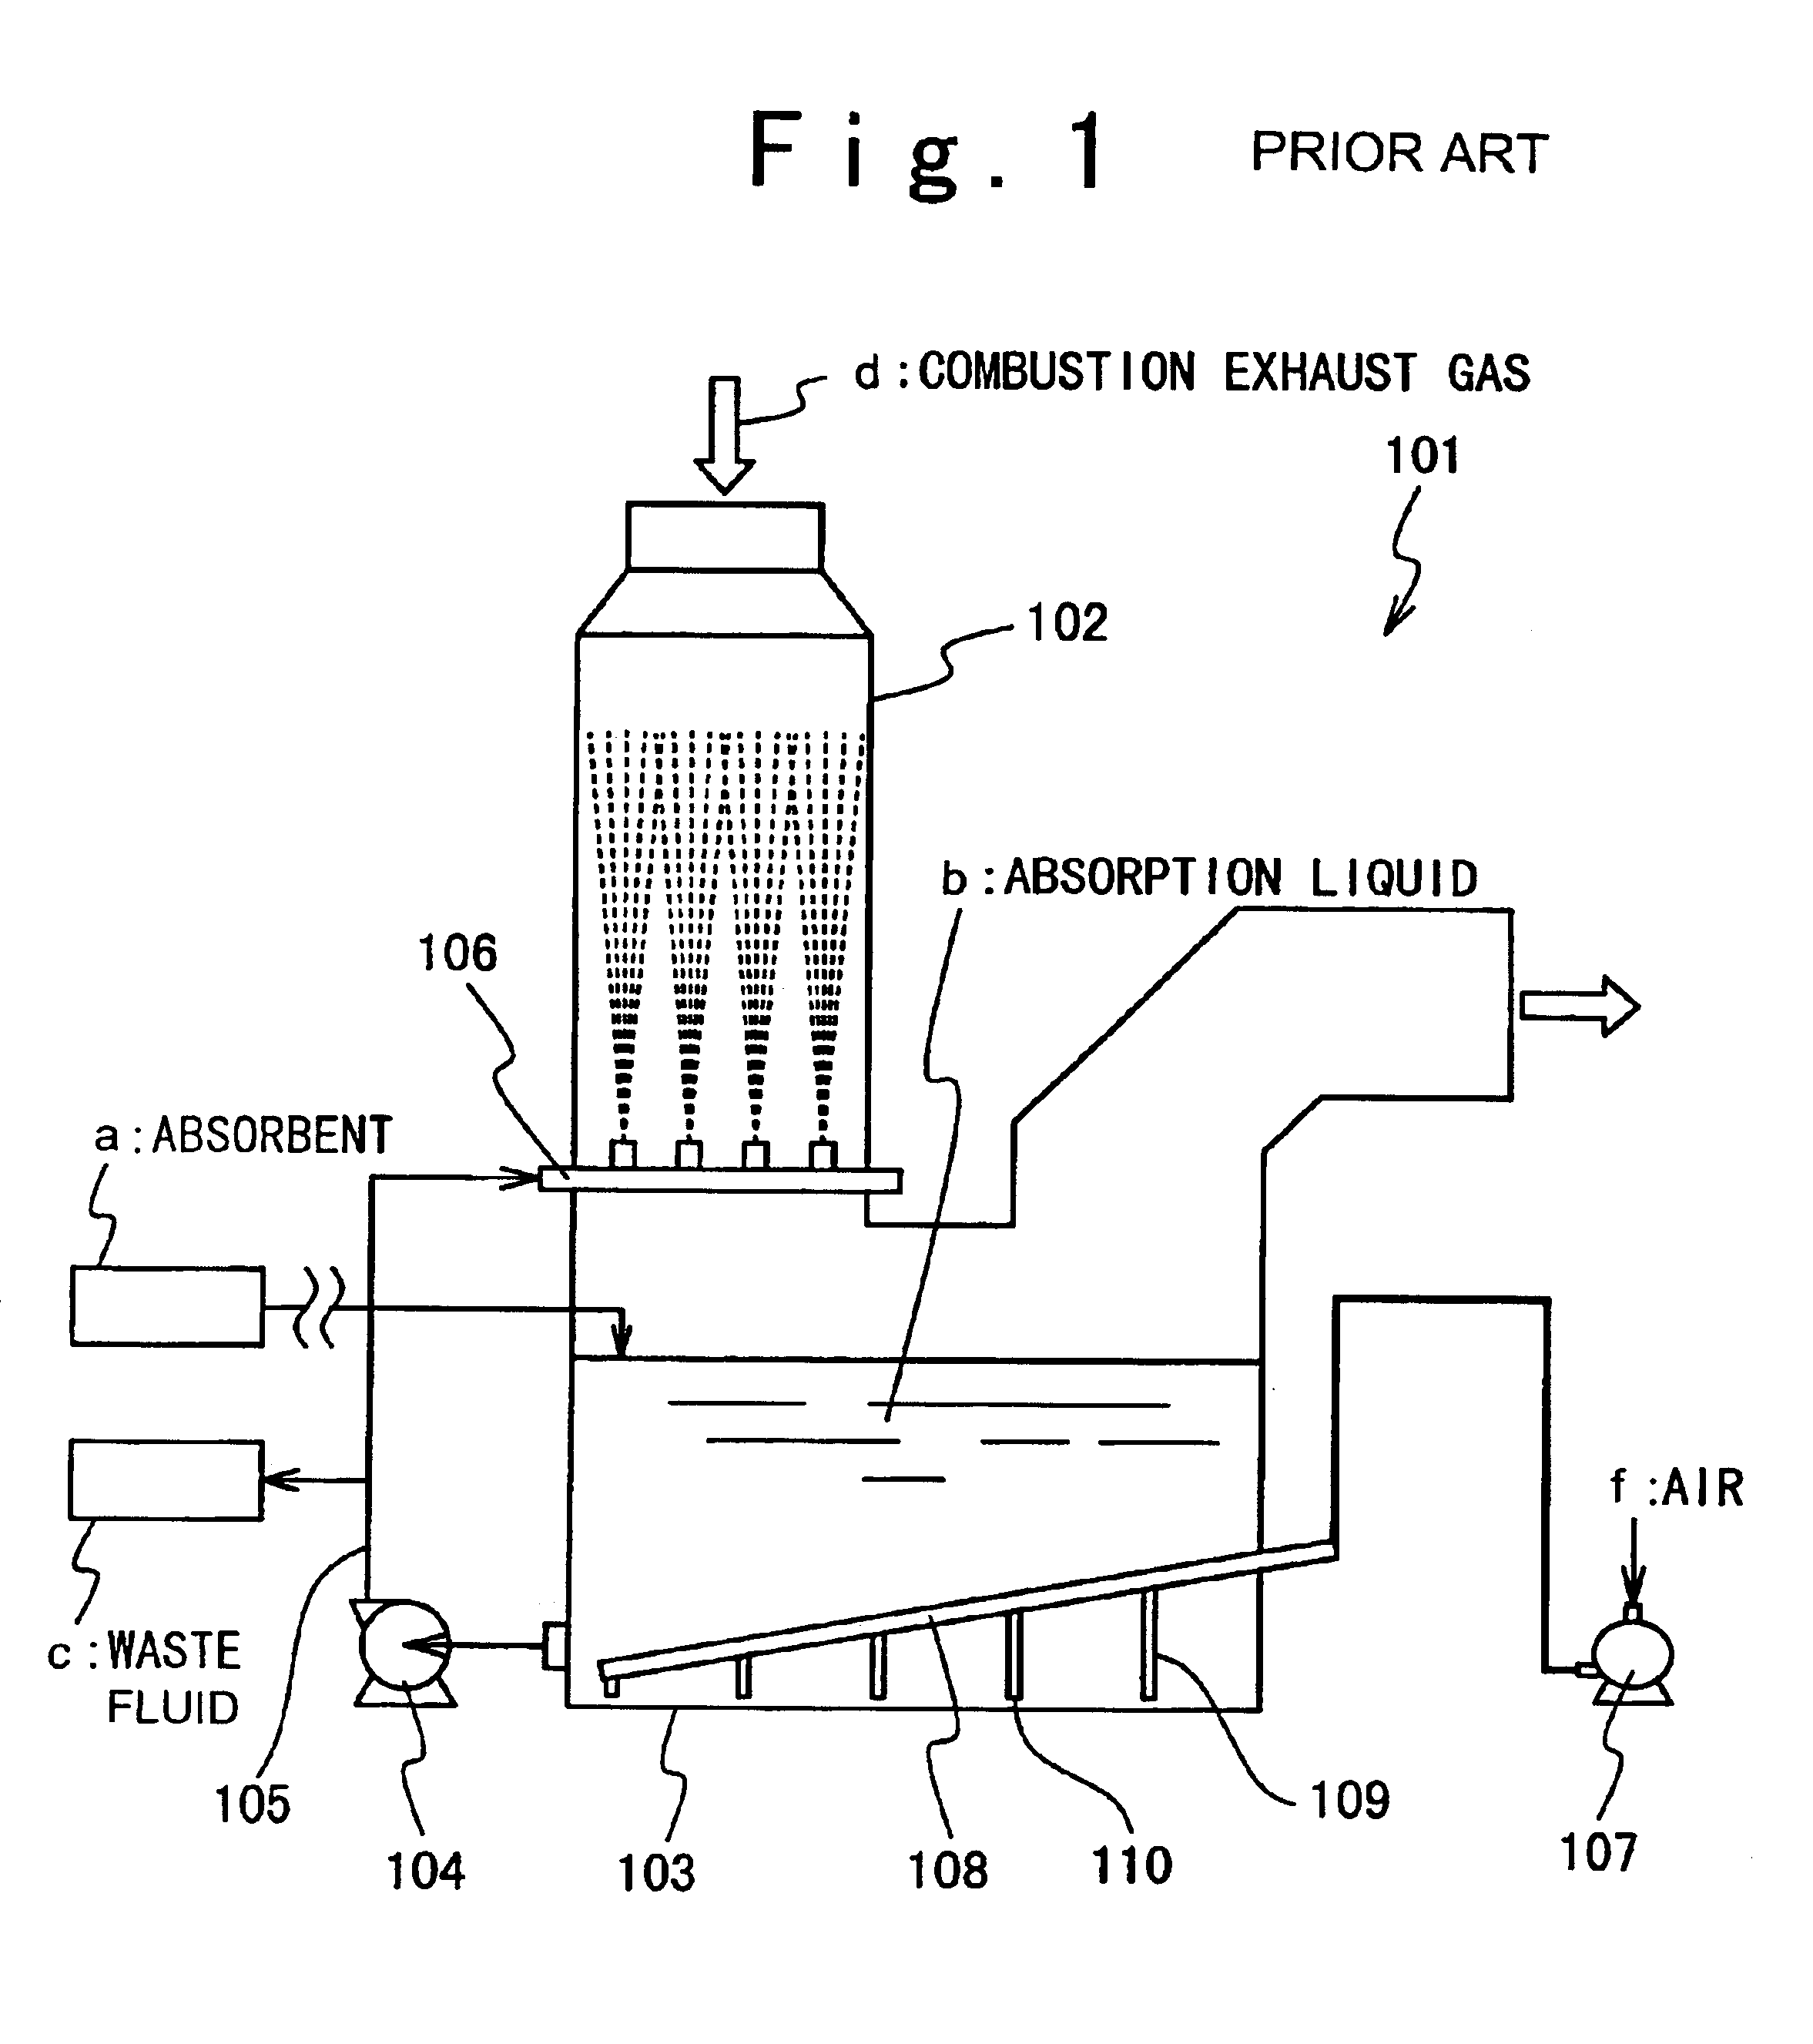 Method and apparatus for wet type flue-gas desulfurization